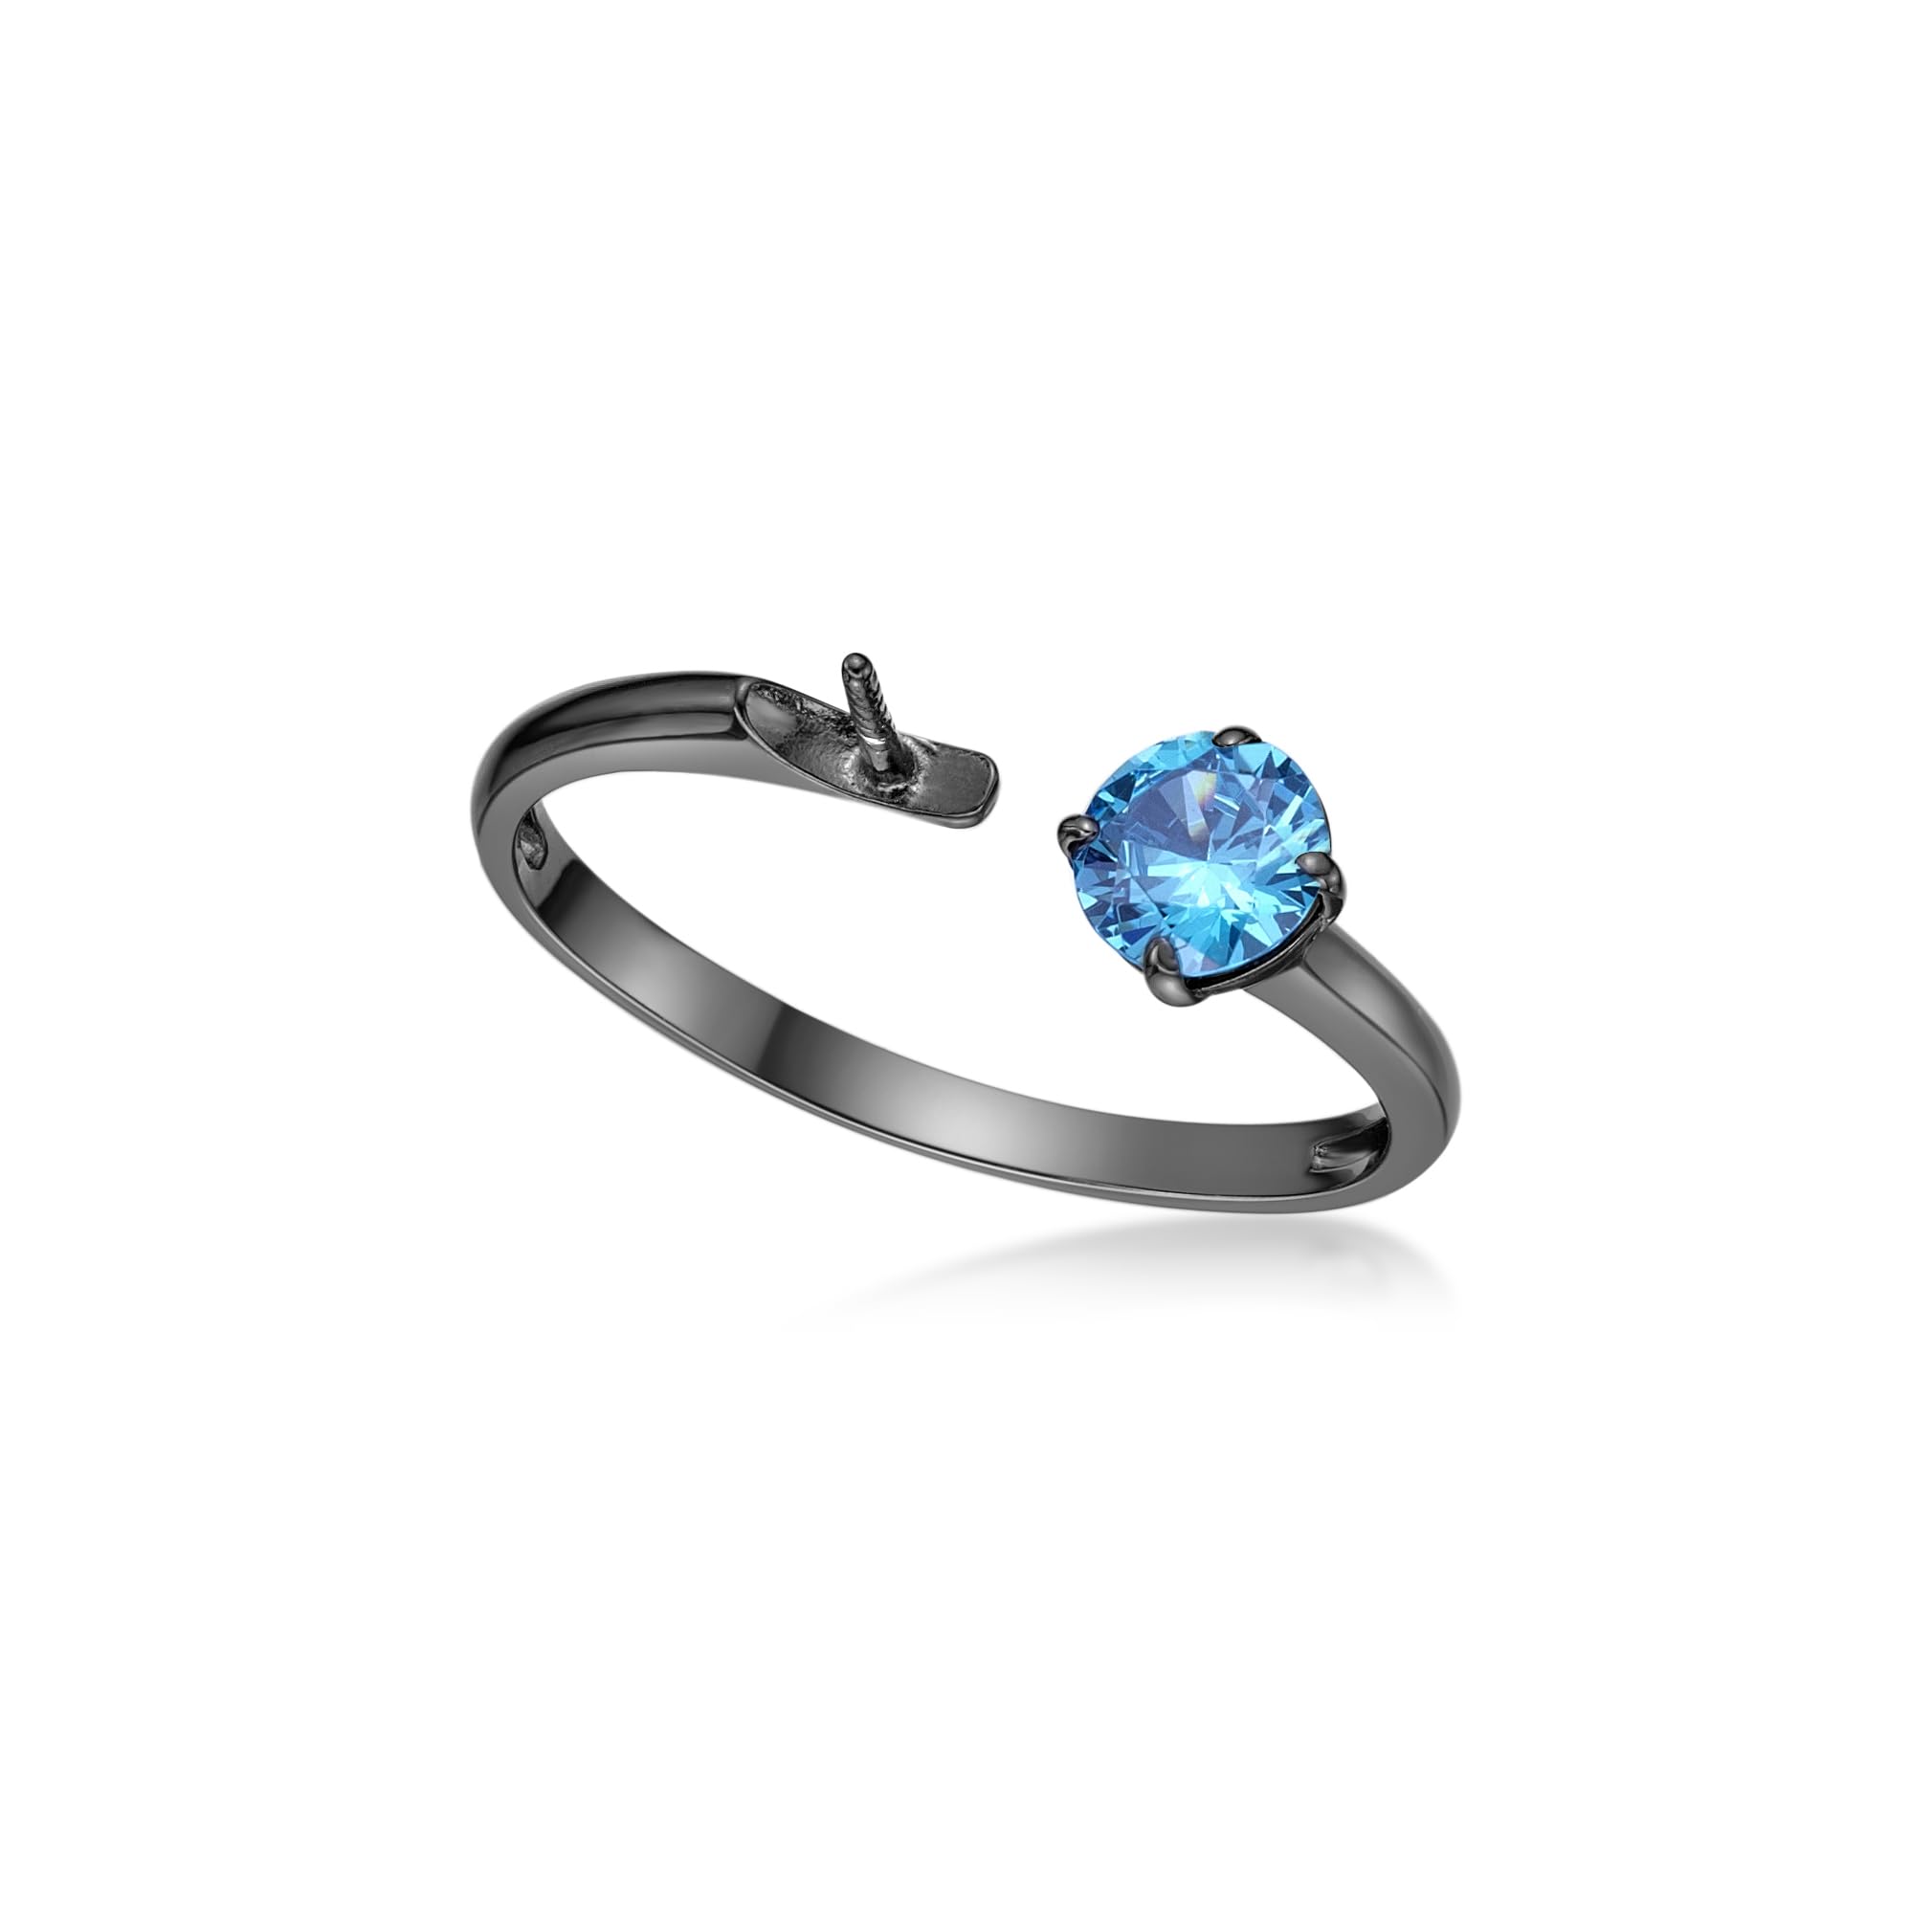 Stylish Black Rhodium Ring Mount with Sea Blue Cubic Zirconia for Pearl Creations